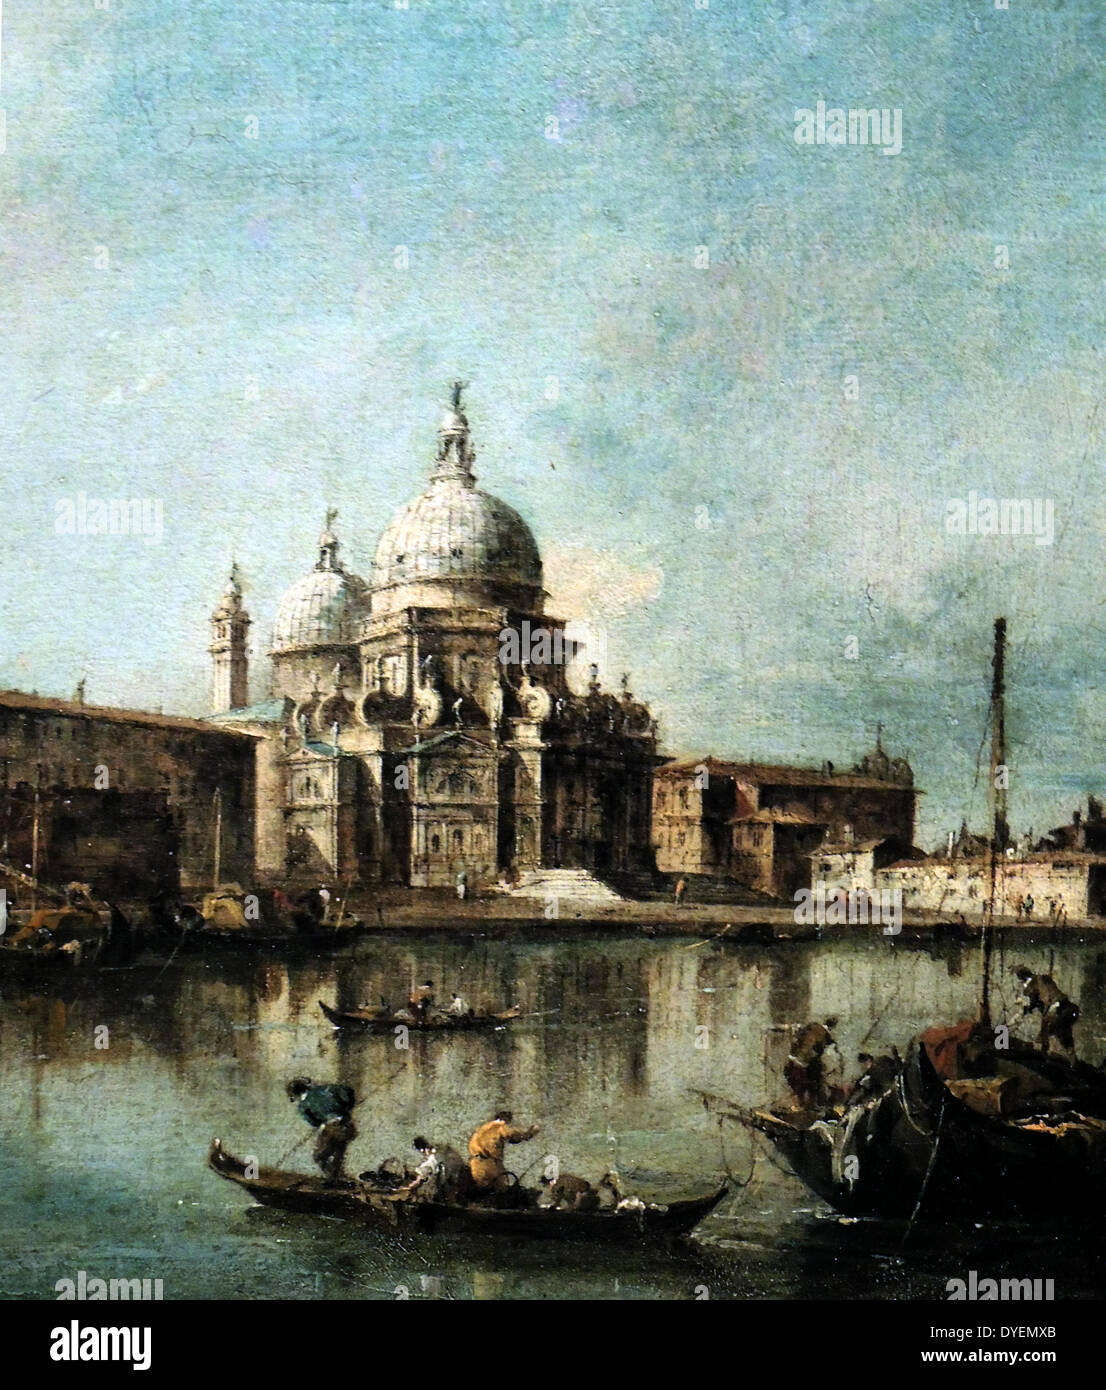 Detail from Santa Maria della Salute and the Dogana, Venice, c. 1770 by Italian painter, Francesco Guardi (1712-1793). He was a Venetian painter of veduta, a member of the Venetian School.  He is considered to be among the last practitioners, along with his brothers, of the classic Venetian school of painting.  Oil on canvas.  Birmingham Museum. Stock Photo